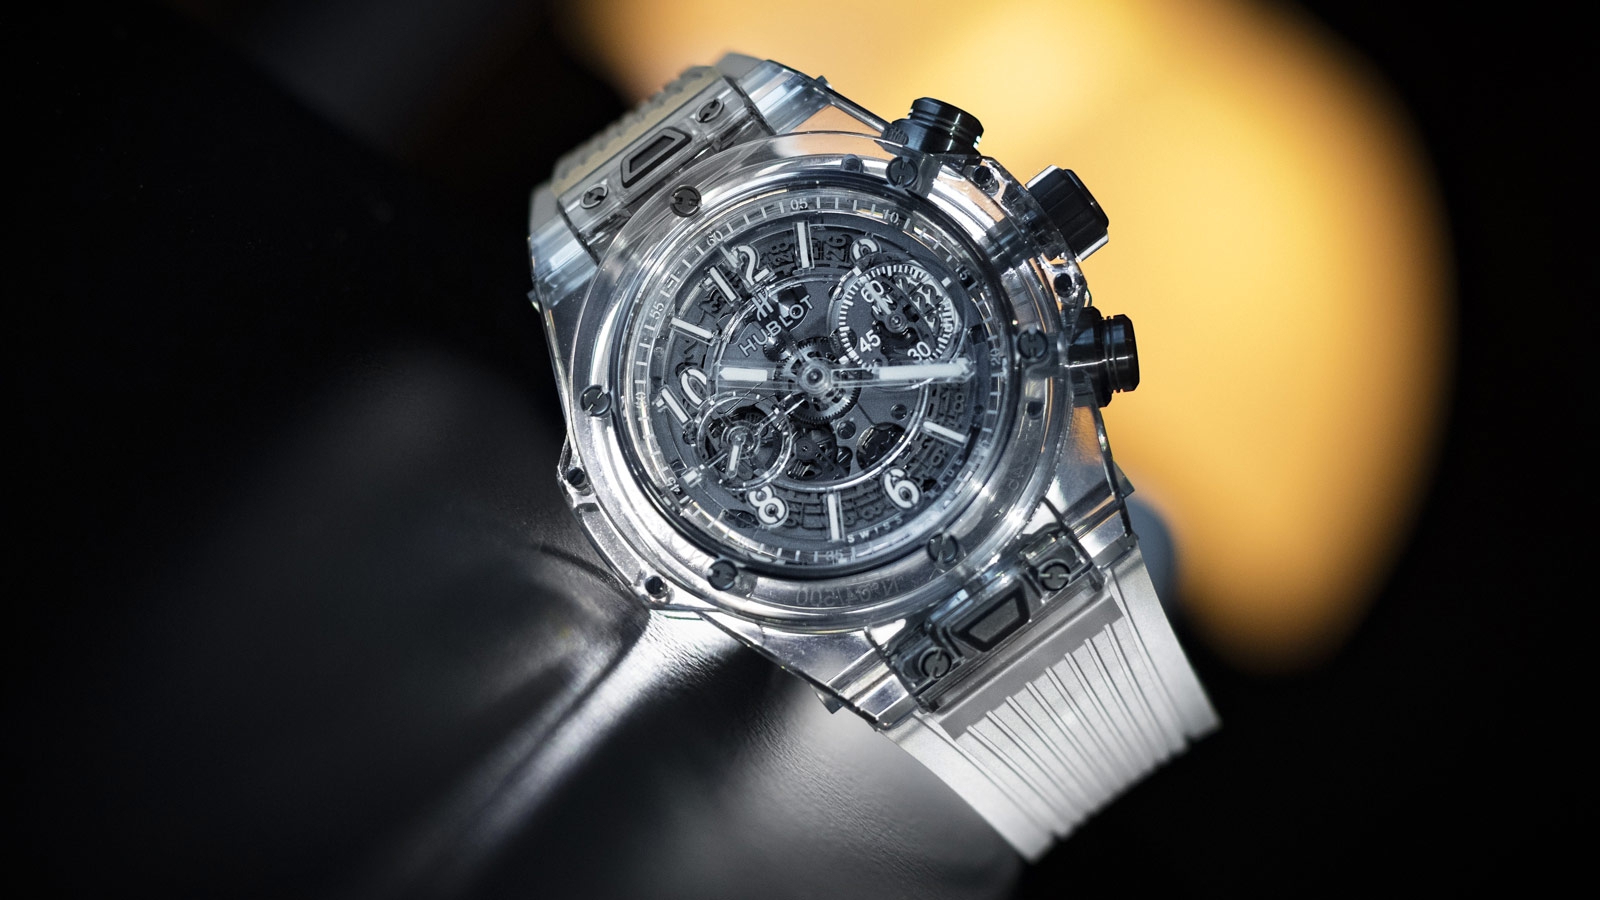 Hublot Created This Incredible Transparent Watch Using Blocks of